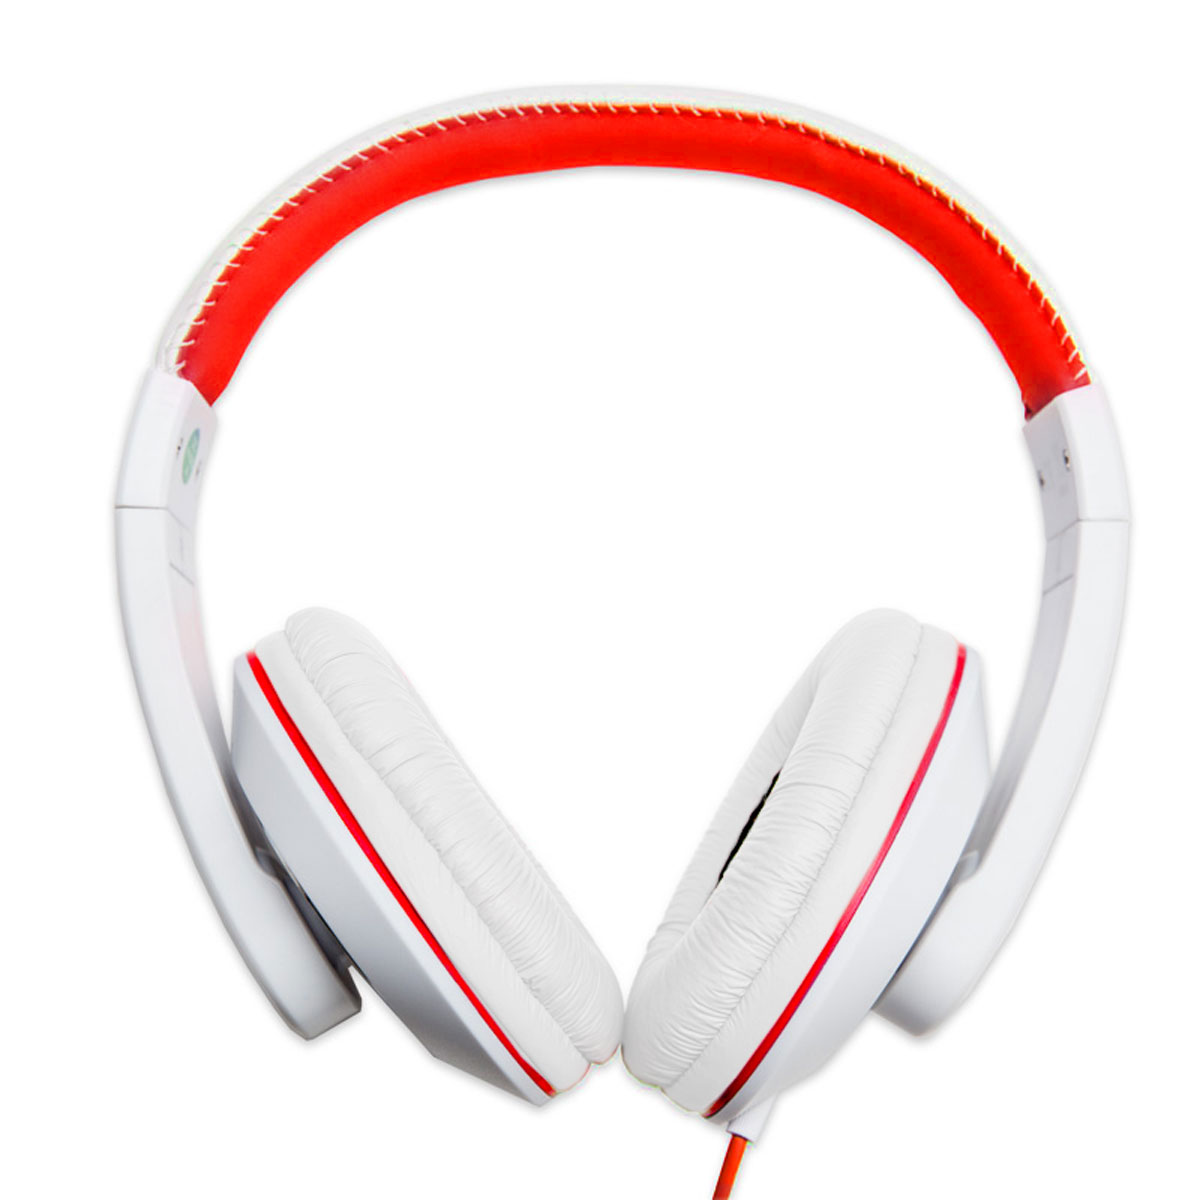 Over The Ear Stereo Kids Mobile Wired Headphone with in-Line Microphone Headphone White Red - image 3 of 3